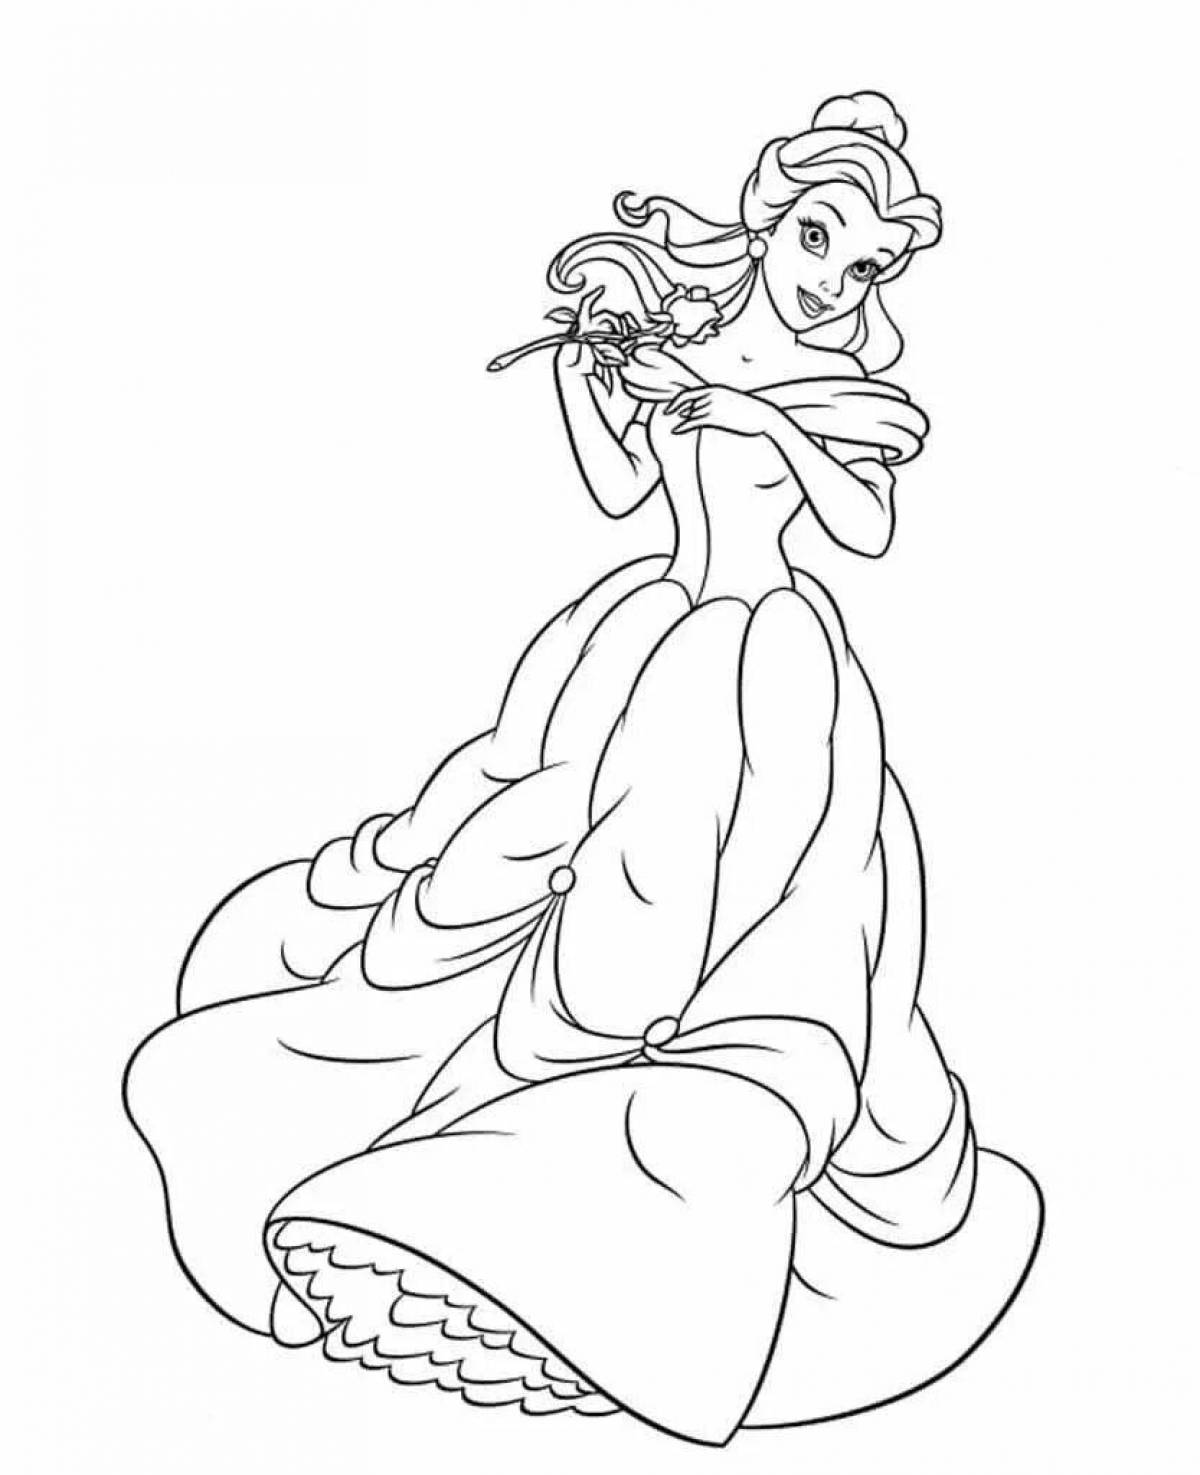 Belle's gorgeous coloring book